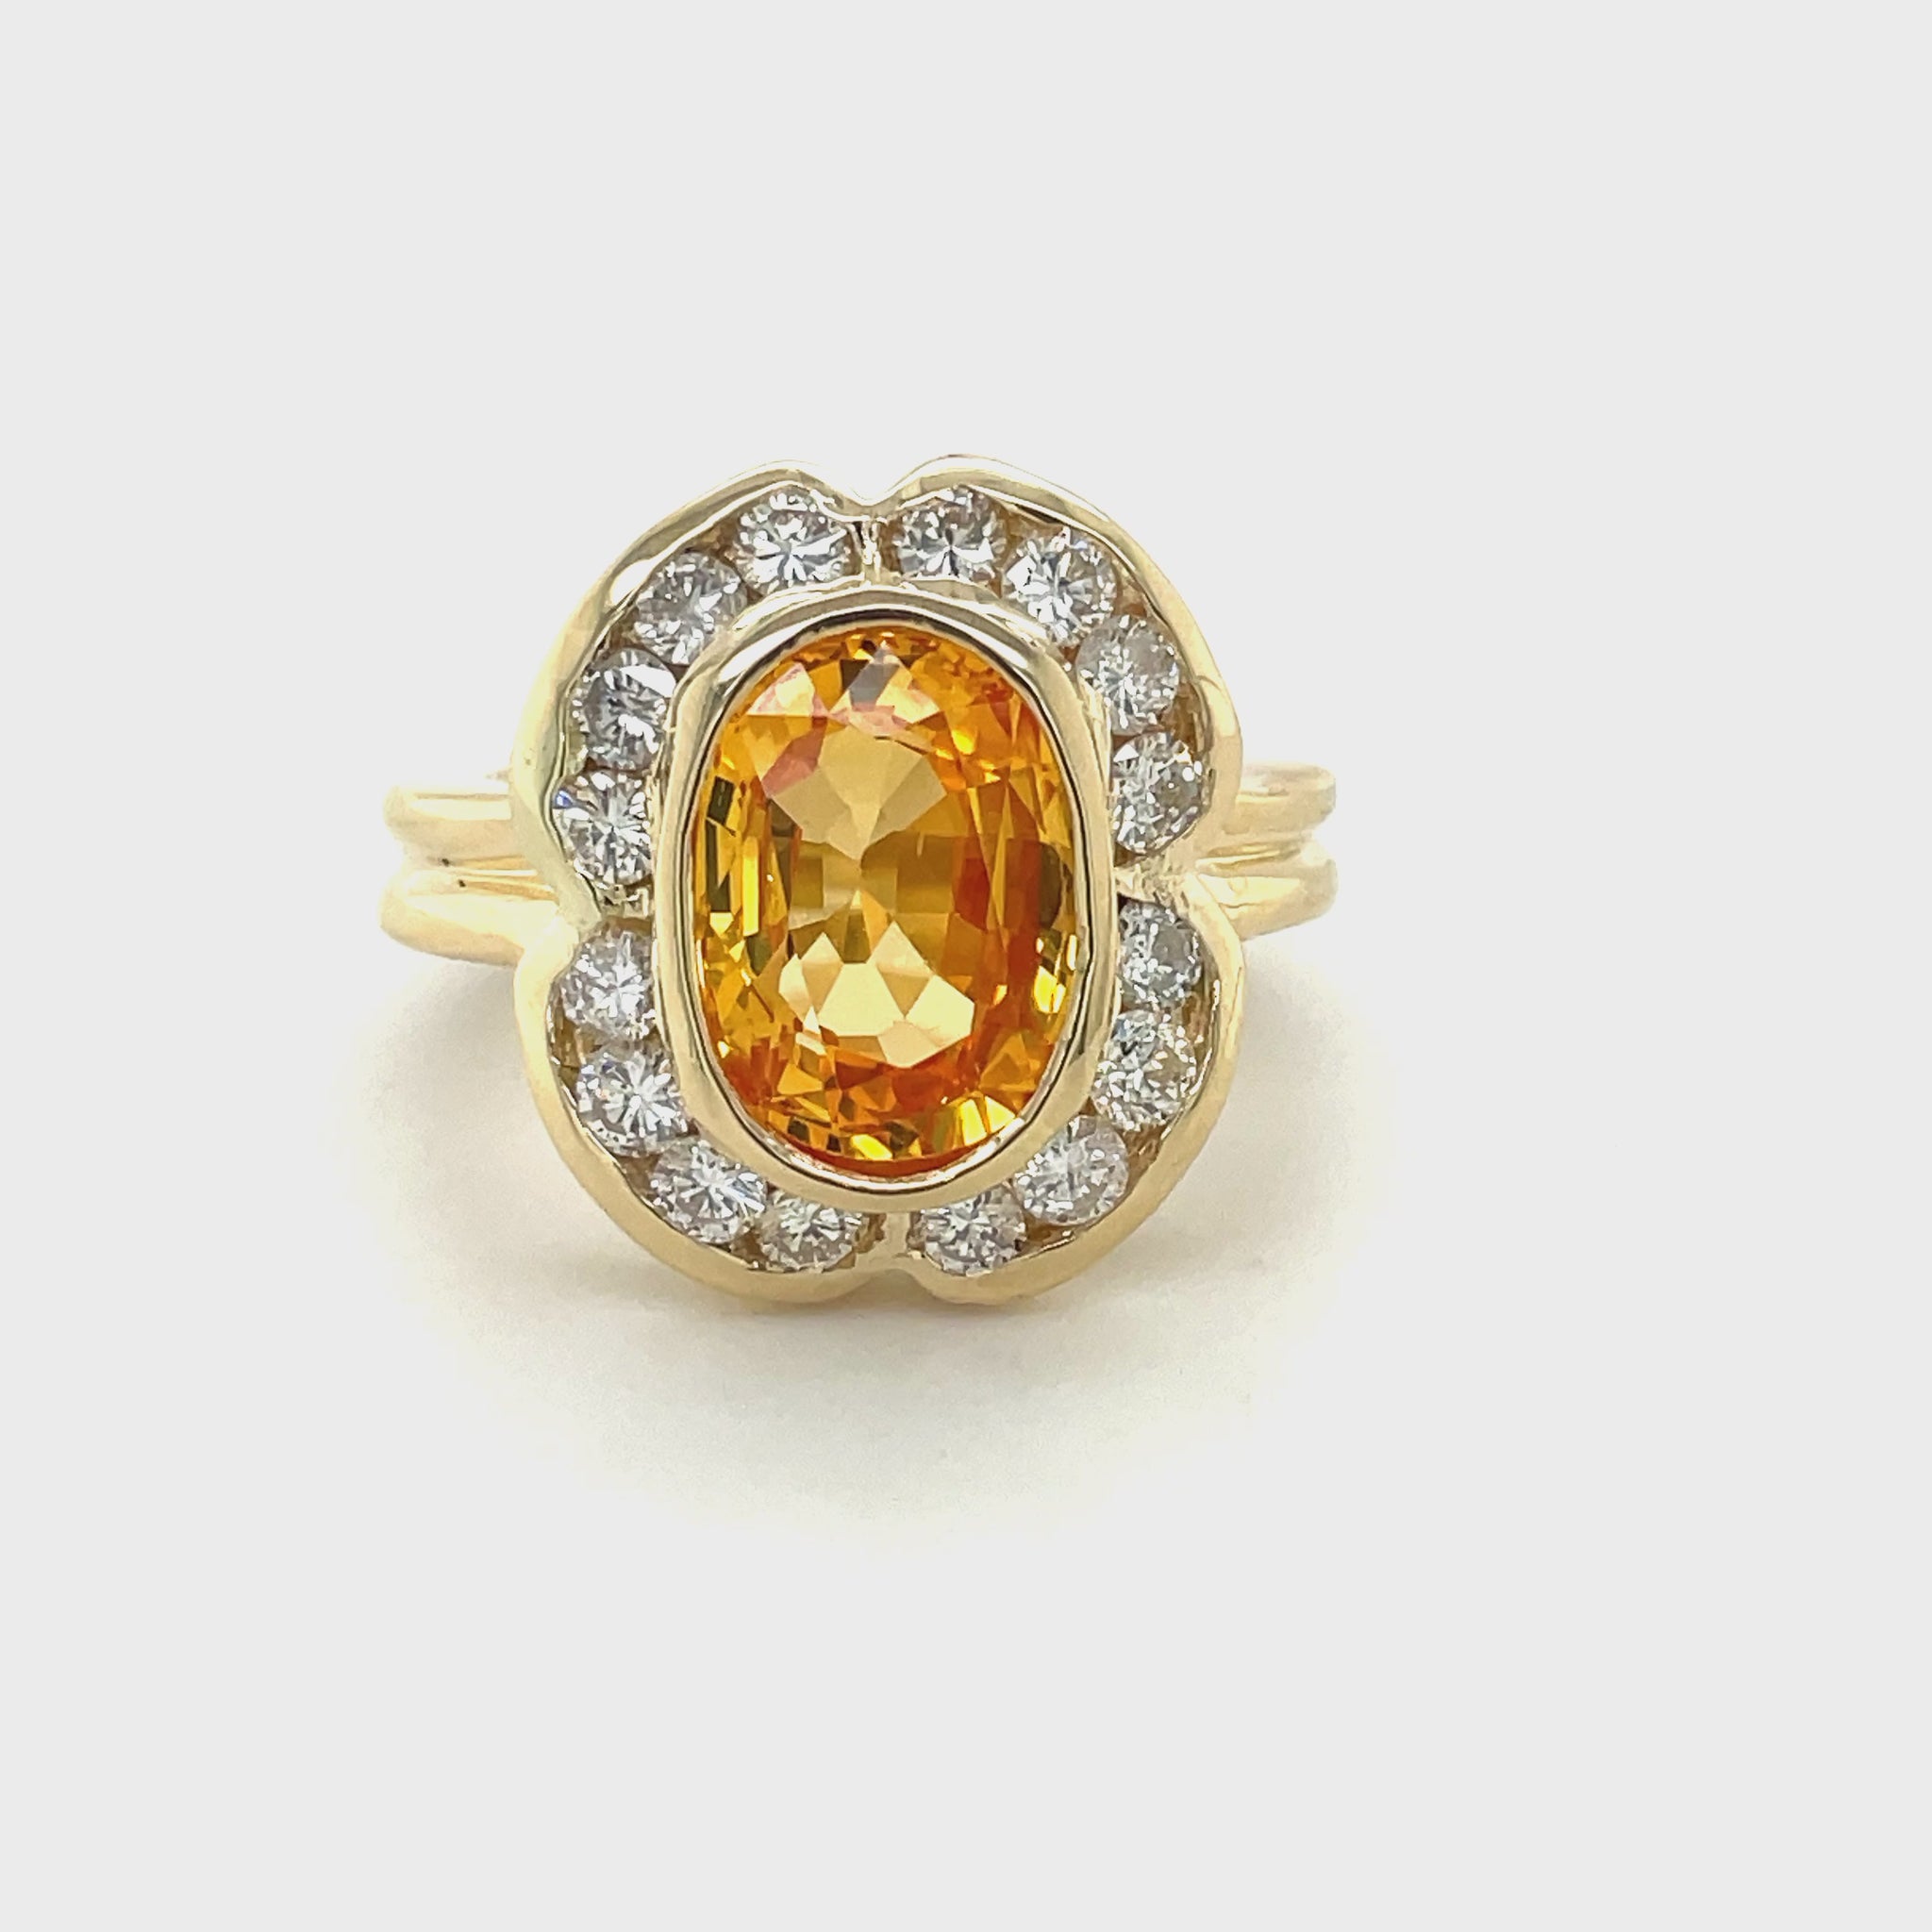 This stunning ring features an orange-yellow oval sapphire of 4.11 carats, surrounded by white round diamonds of 0.93 carats in total weight. Set in 14K white gold, this one-of-a-kind piece guarantees a high-quality craftsmanship and will be a unique addition to any jewelry collection. The ring is 18.00 mm in size and 15.00 mm in width.